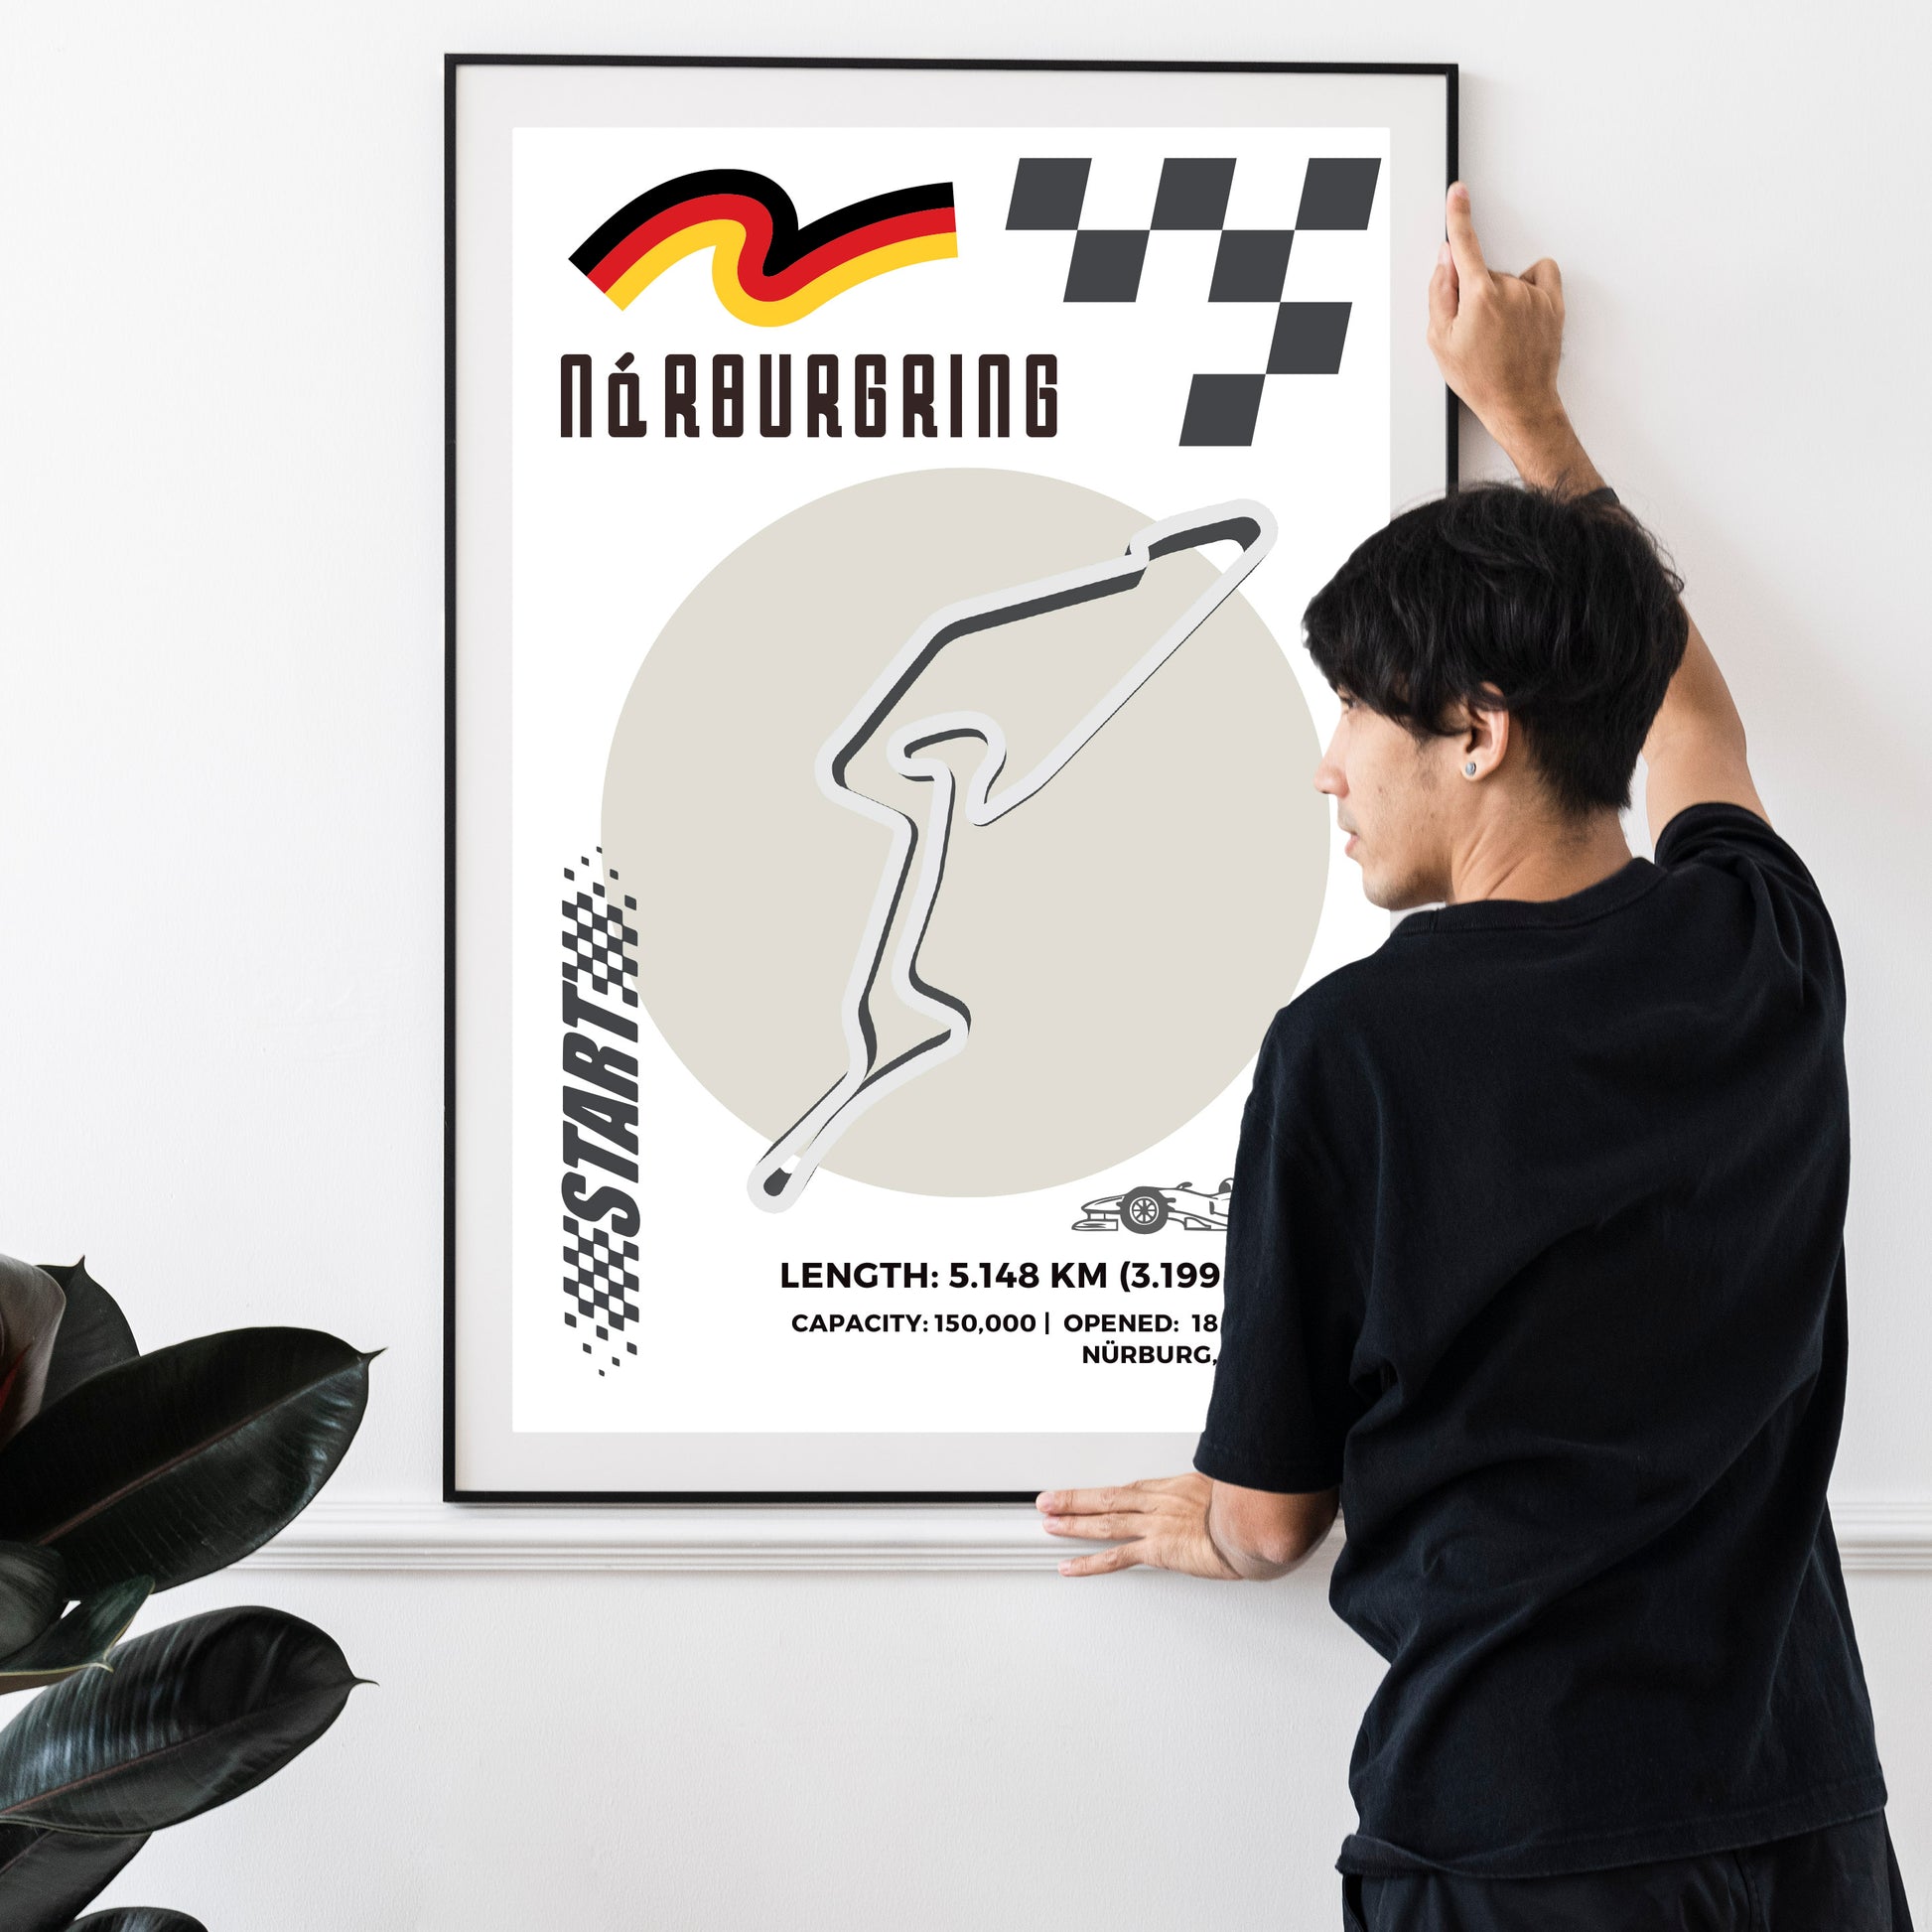 Enhance your love for Formula One with our NÜRBURGRING Circuit F1 posters. Made of matte premium paper, each poster features detailed information about the circuit's history and notable moments. Perfect for any fan, these posters are made in the UK and are age-resistant. Get the ultimate F1 experience with our Formula One Poster.